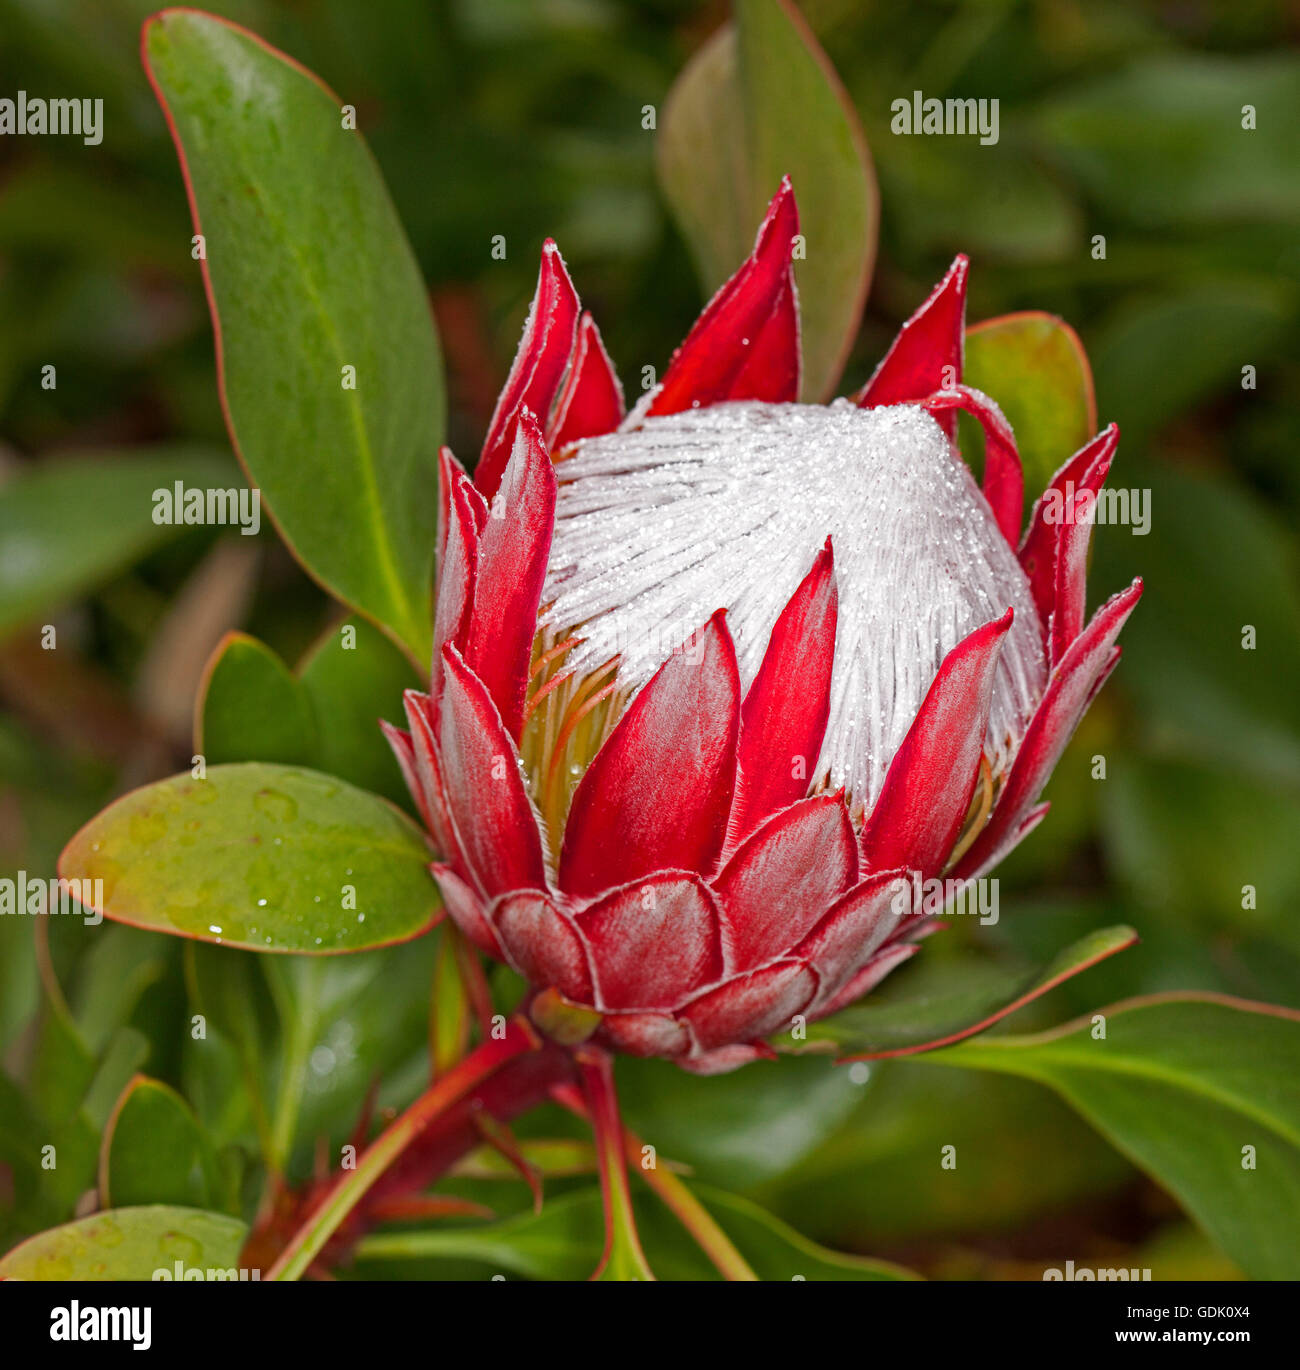 Spectacular large vivid red and white flower and glossy green leaves of Protea cynaroides, king protea on dark green background Stock Photo